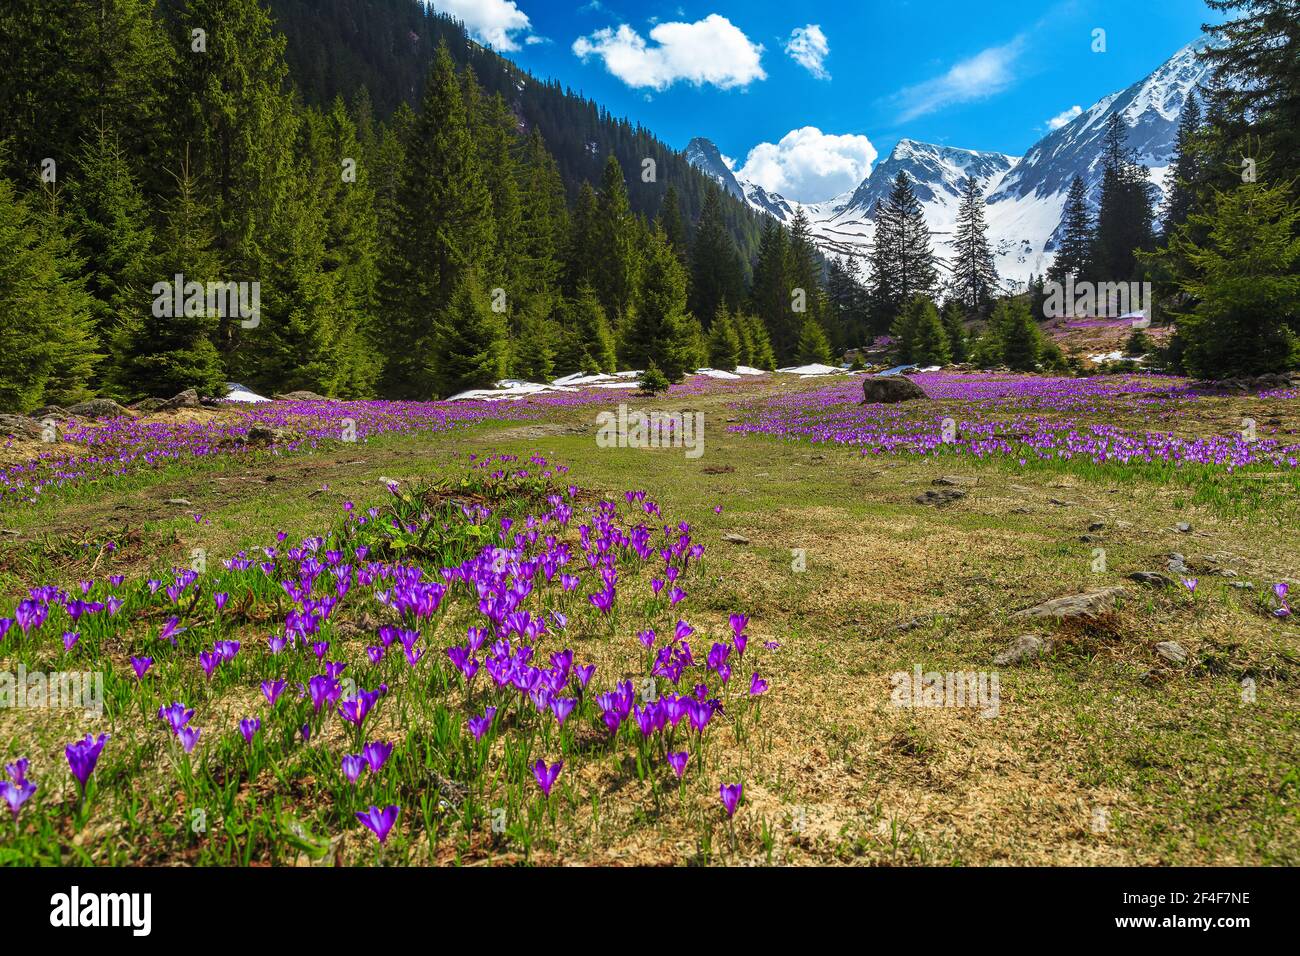 Stunning alpine spring scenery, wonderful flowery forest glade with blooming purple crocus flowers and snowy mountains in background, Fagaras mountain Stock Photo